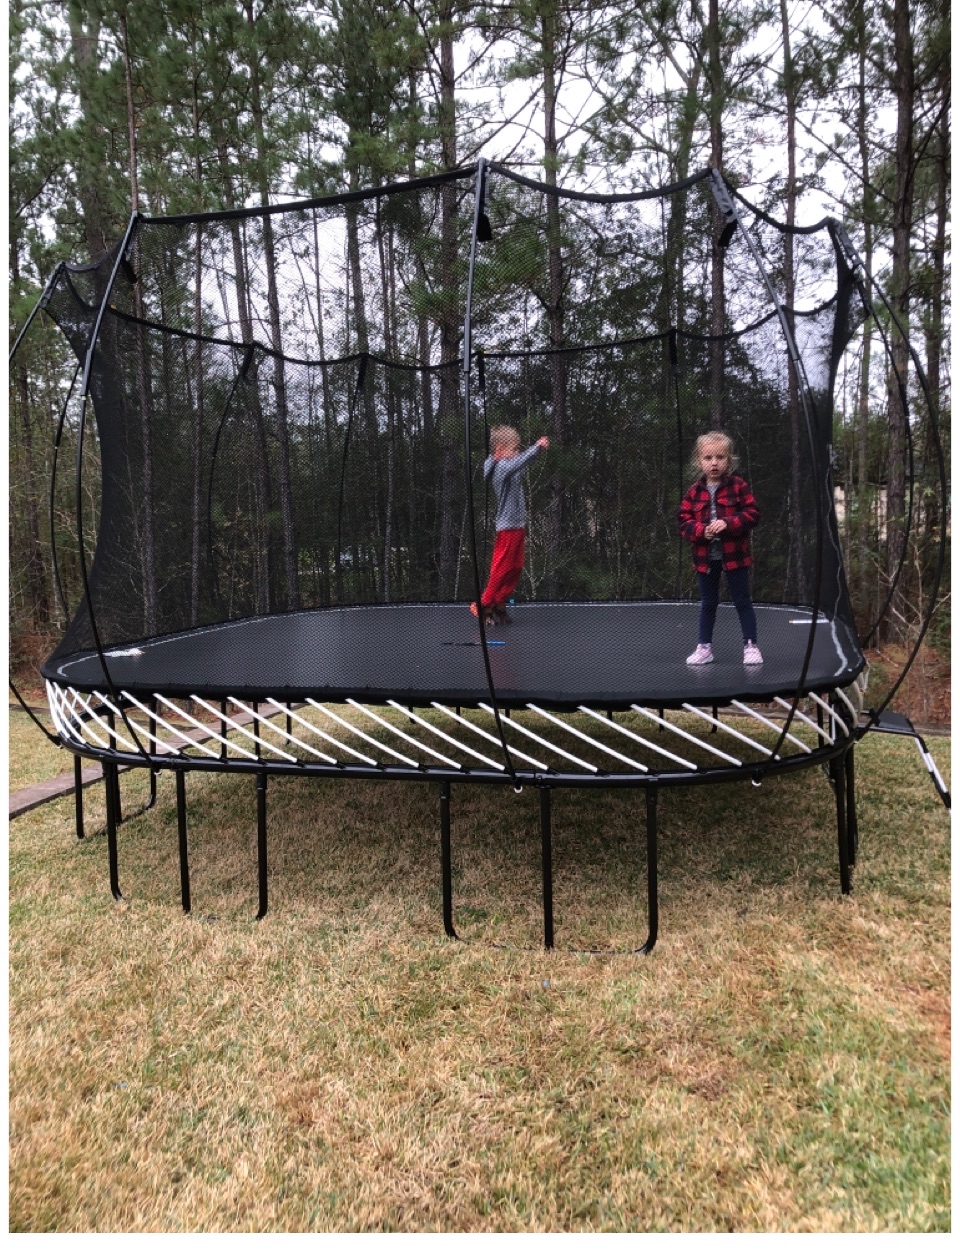 anthony frayne recommends Double Stack On A Big Bouncy Trampoline